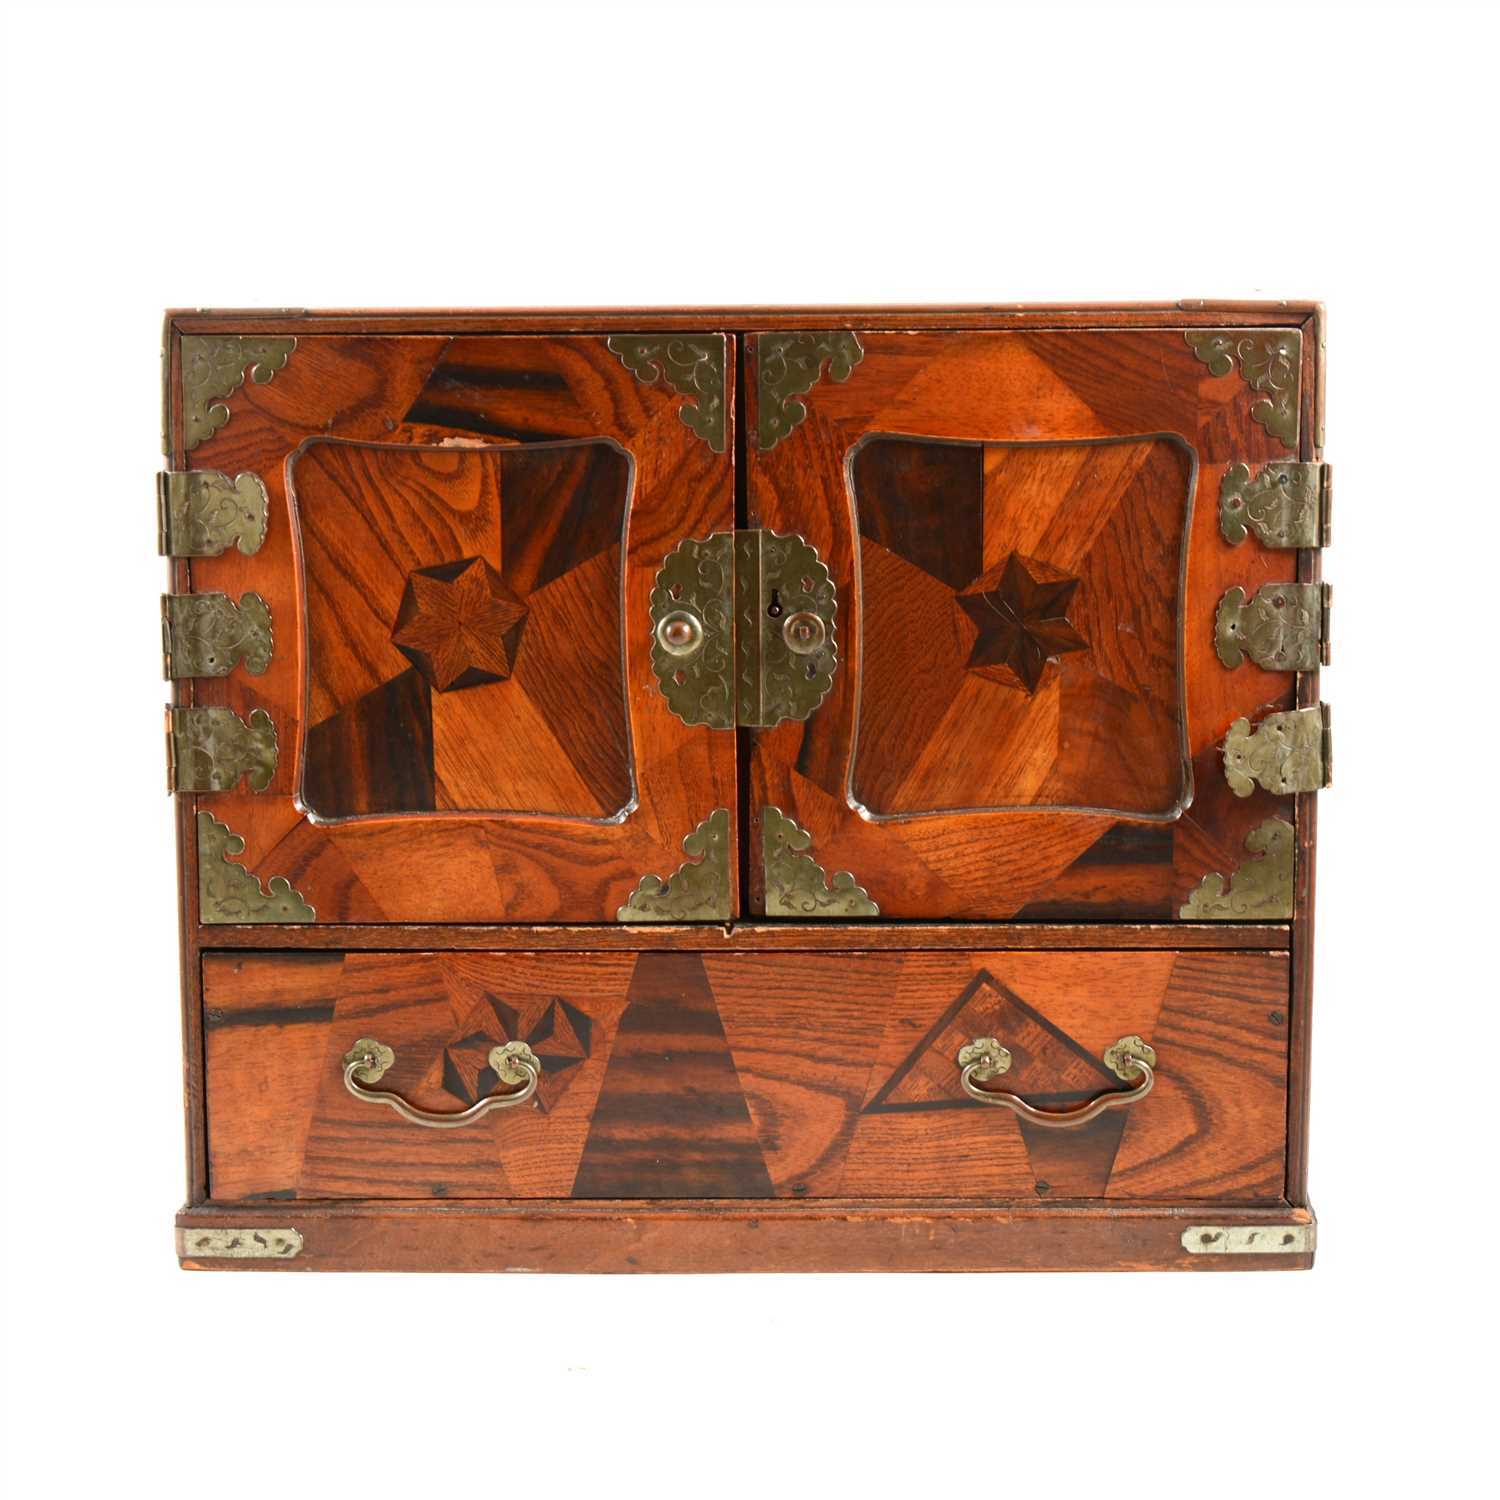 Lot 122 - Japanese parquetry table cabinet